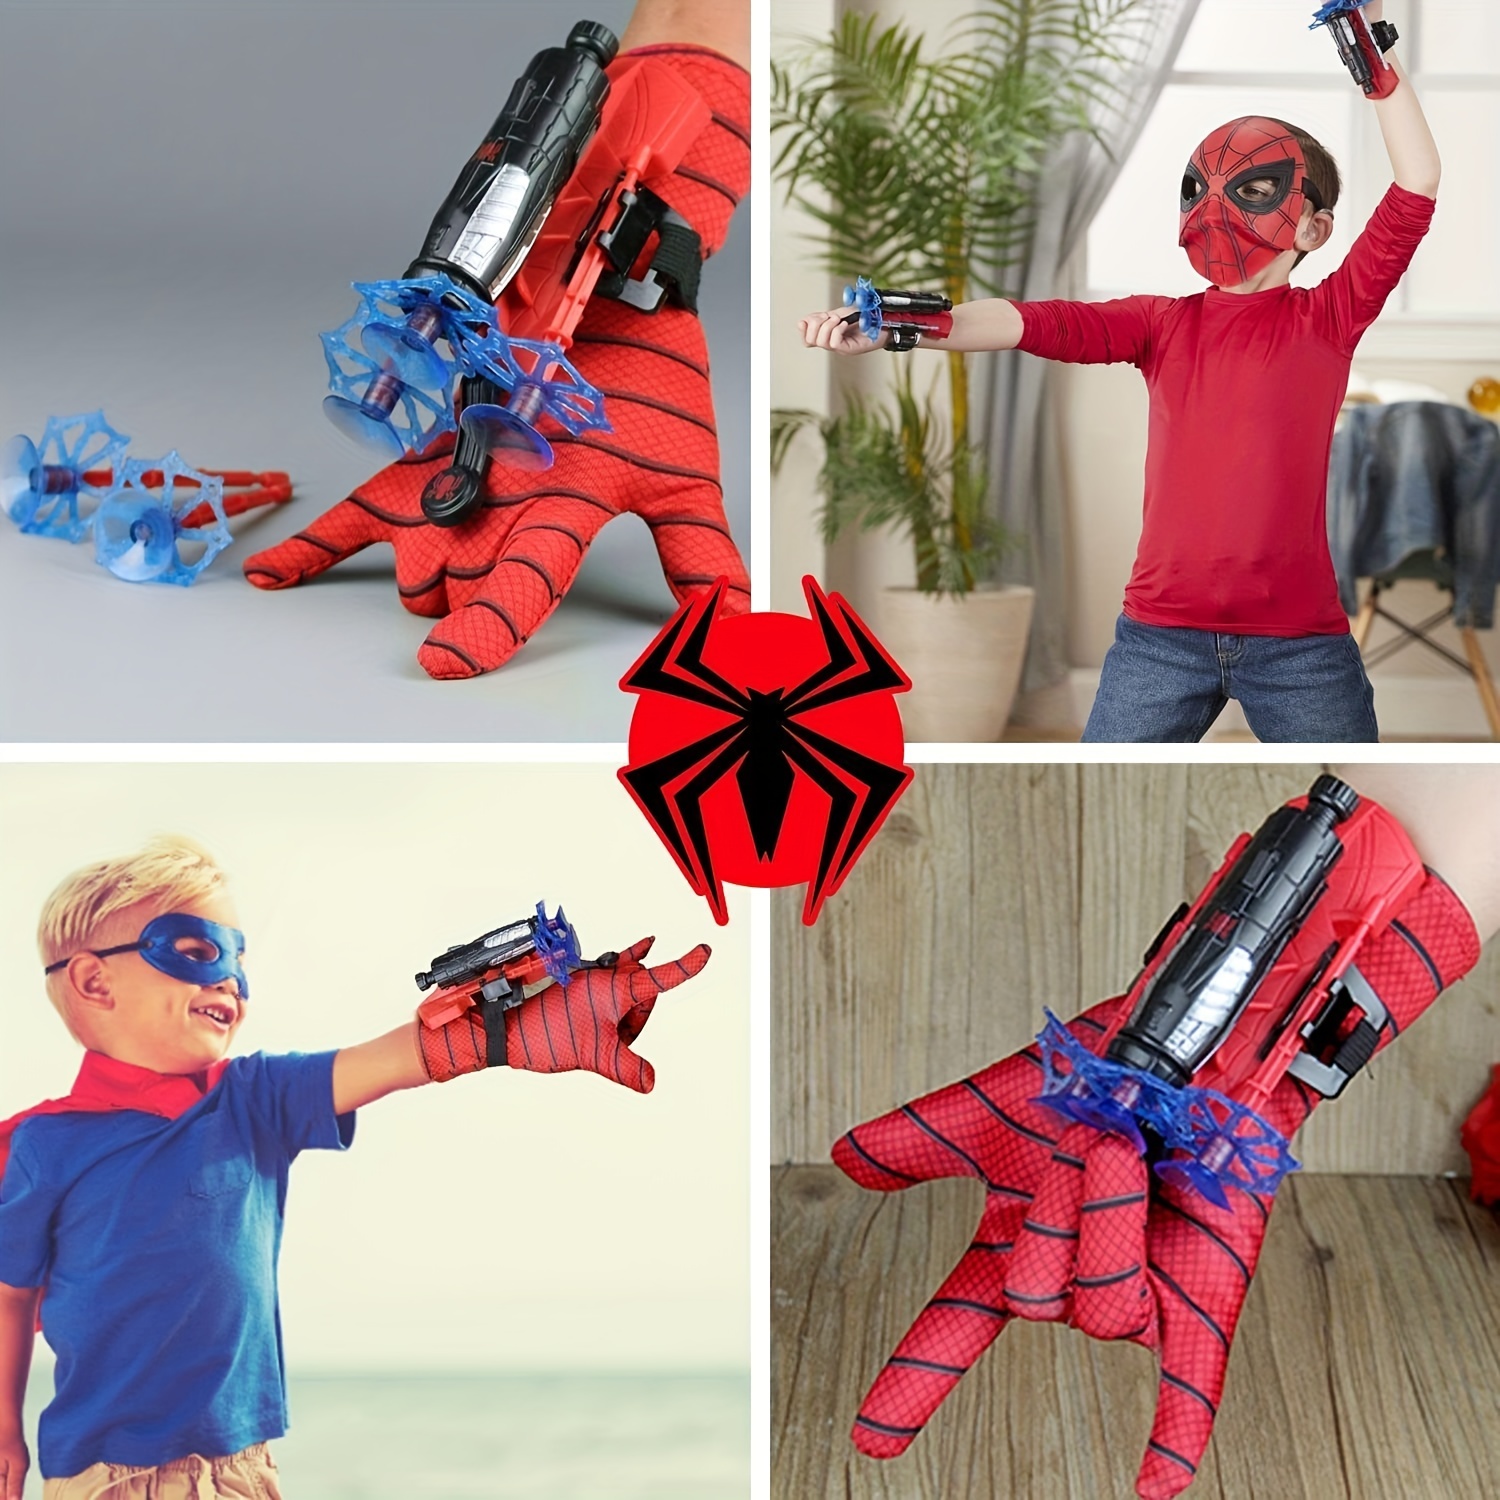 Spider Web Shooter, Super Hero Role-Playing, Hero Launcher Wrist Gloves Toy  Costume for Cosplay 